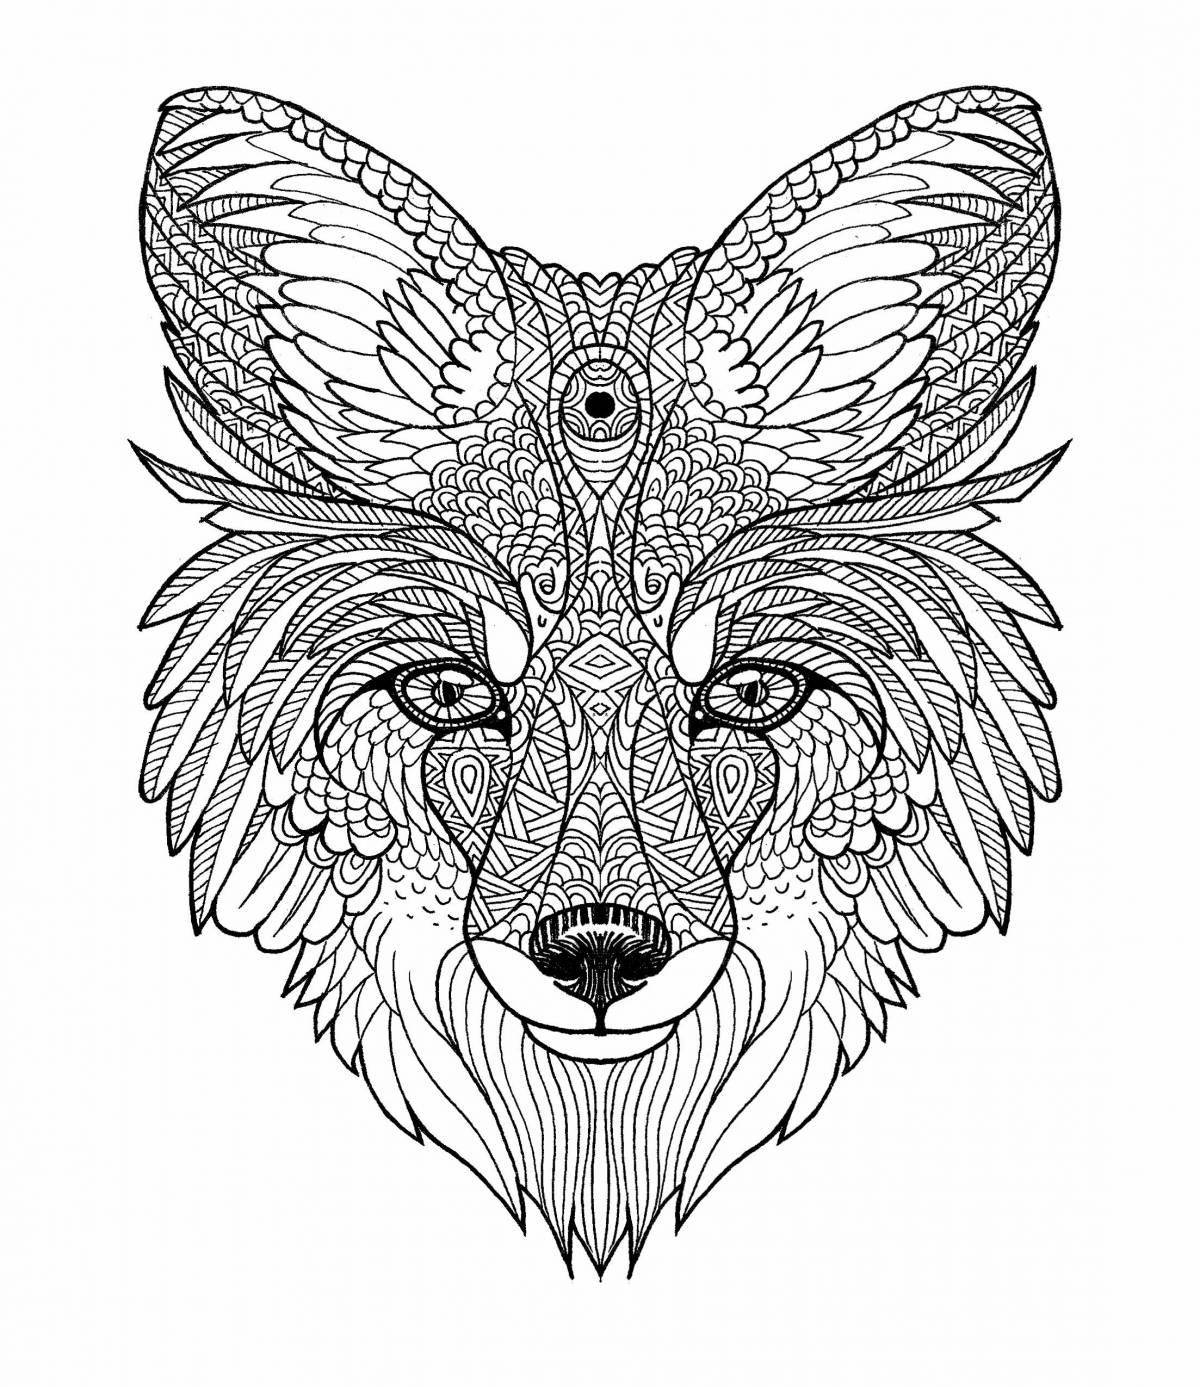 Fascinating coloring book antistress wolf